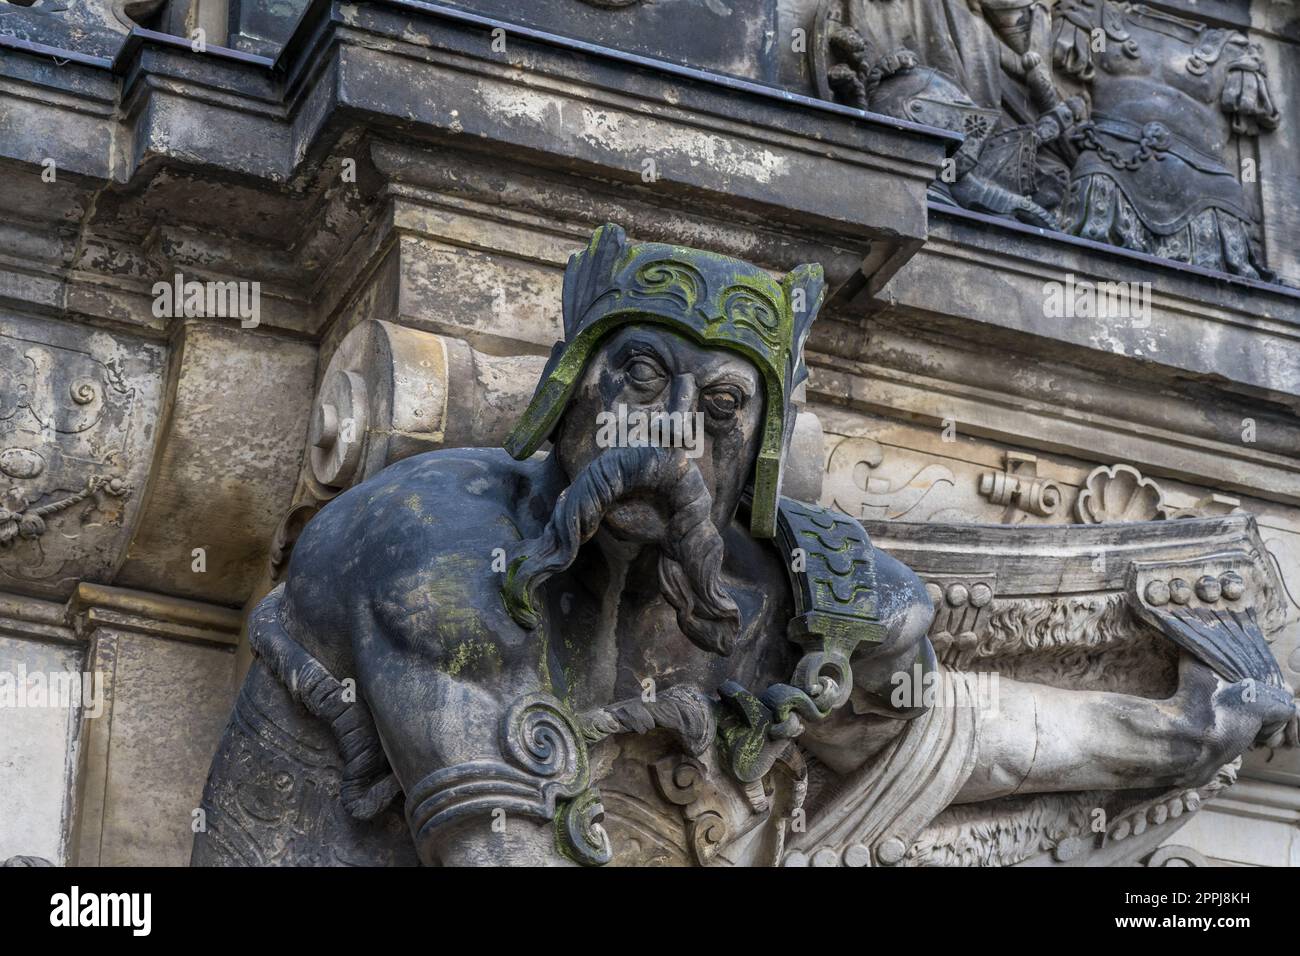 Sculpture of ancient warriors in front of the Georg gate in the historic center of Dresden. Germany. Medieval European architecture. Stock Photo